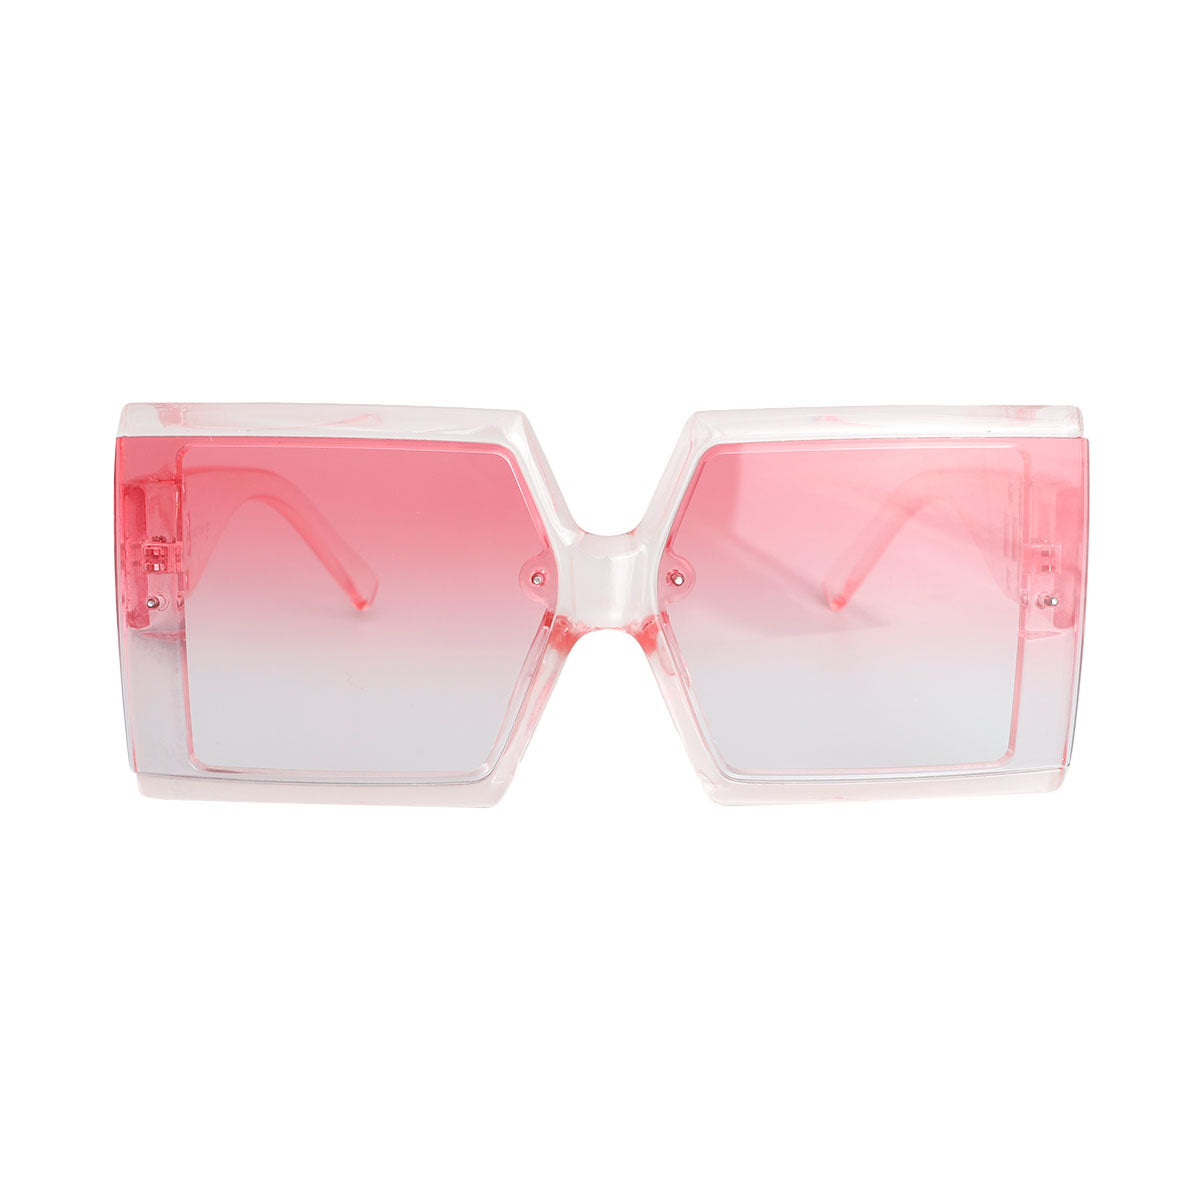 Shiny Pink Square Painted Sunglasses